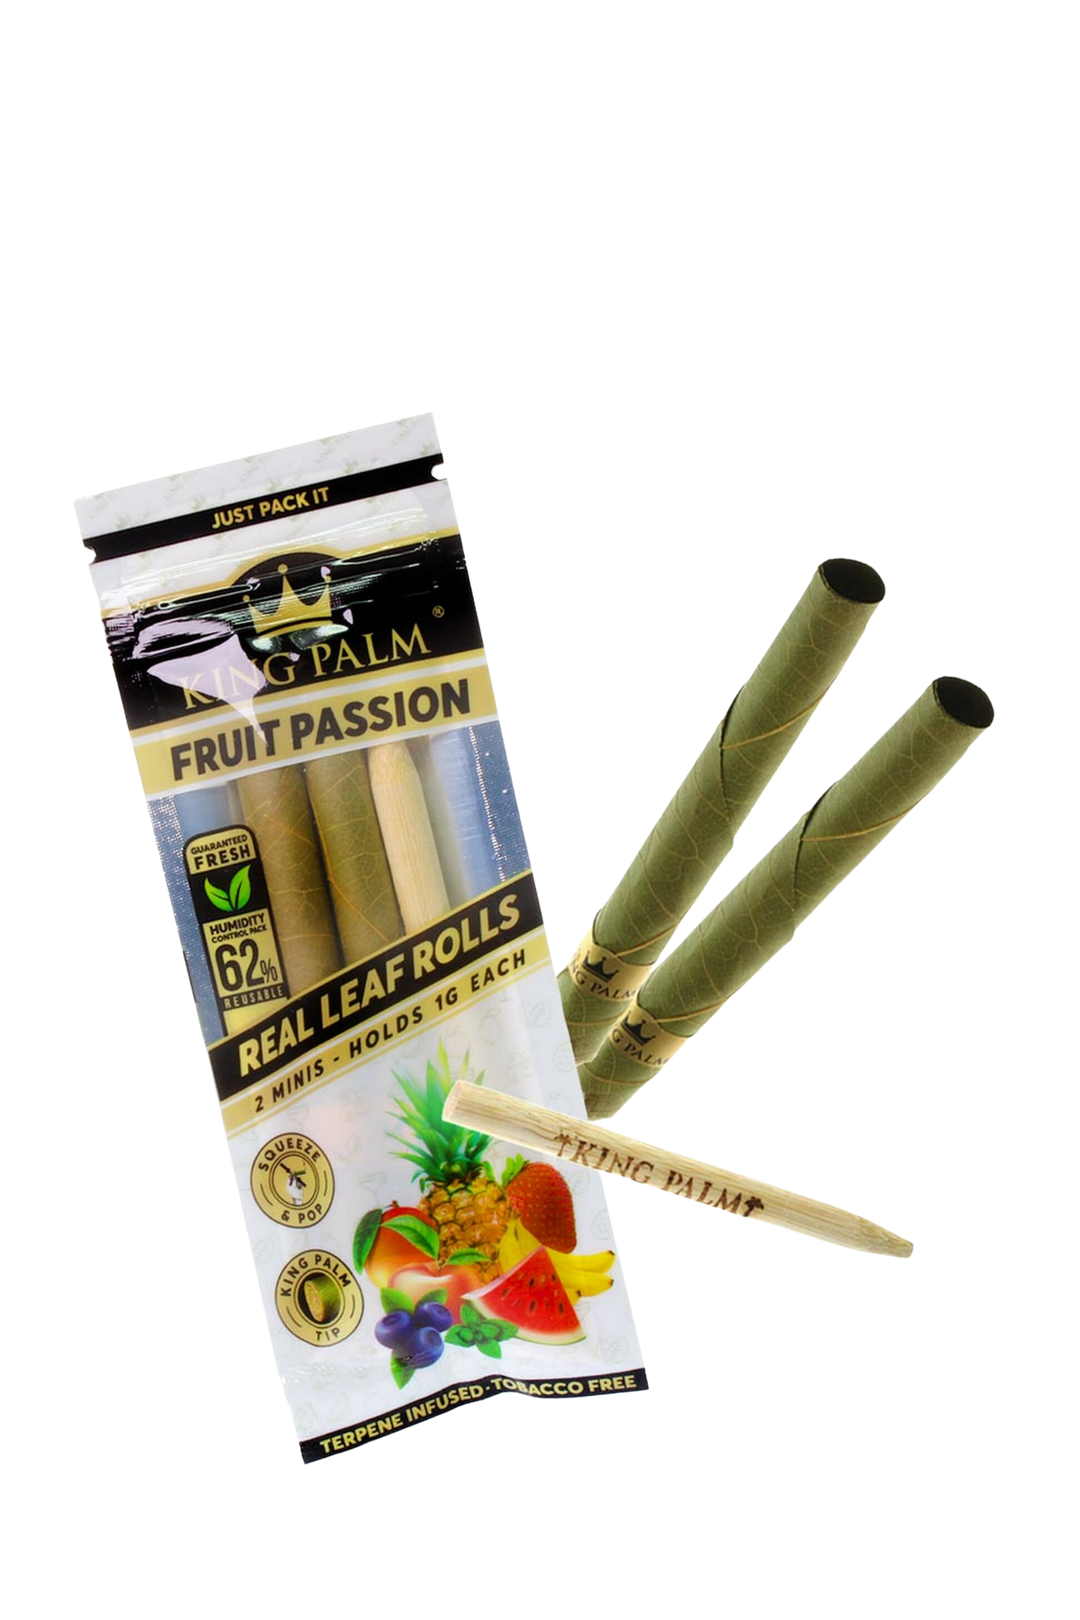 King Palm 2 Slim Rolls Fruit Passion - The SWL Store 